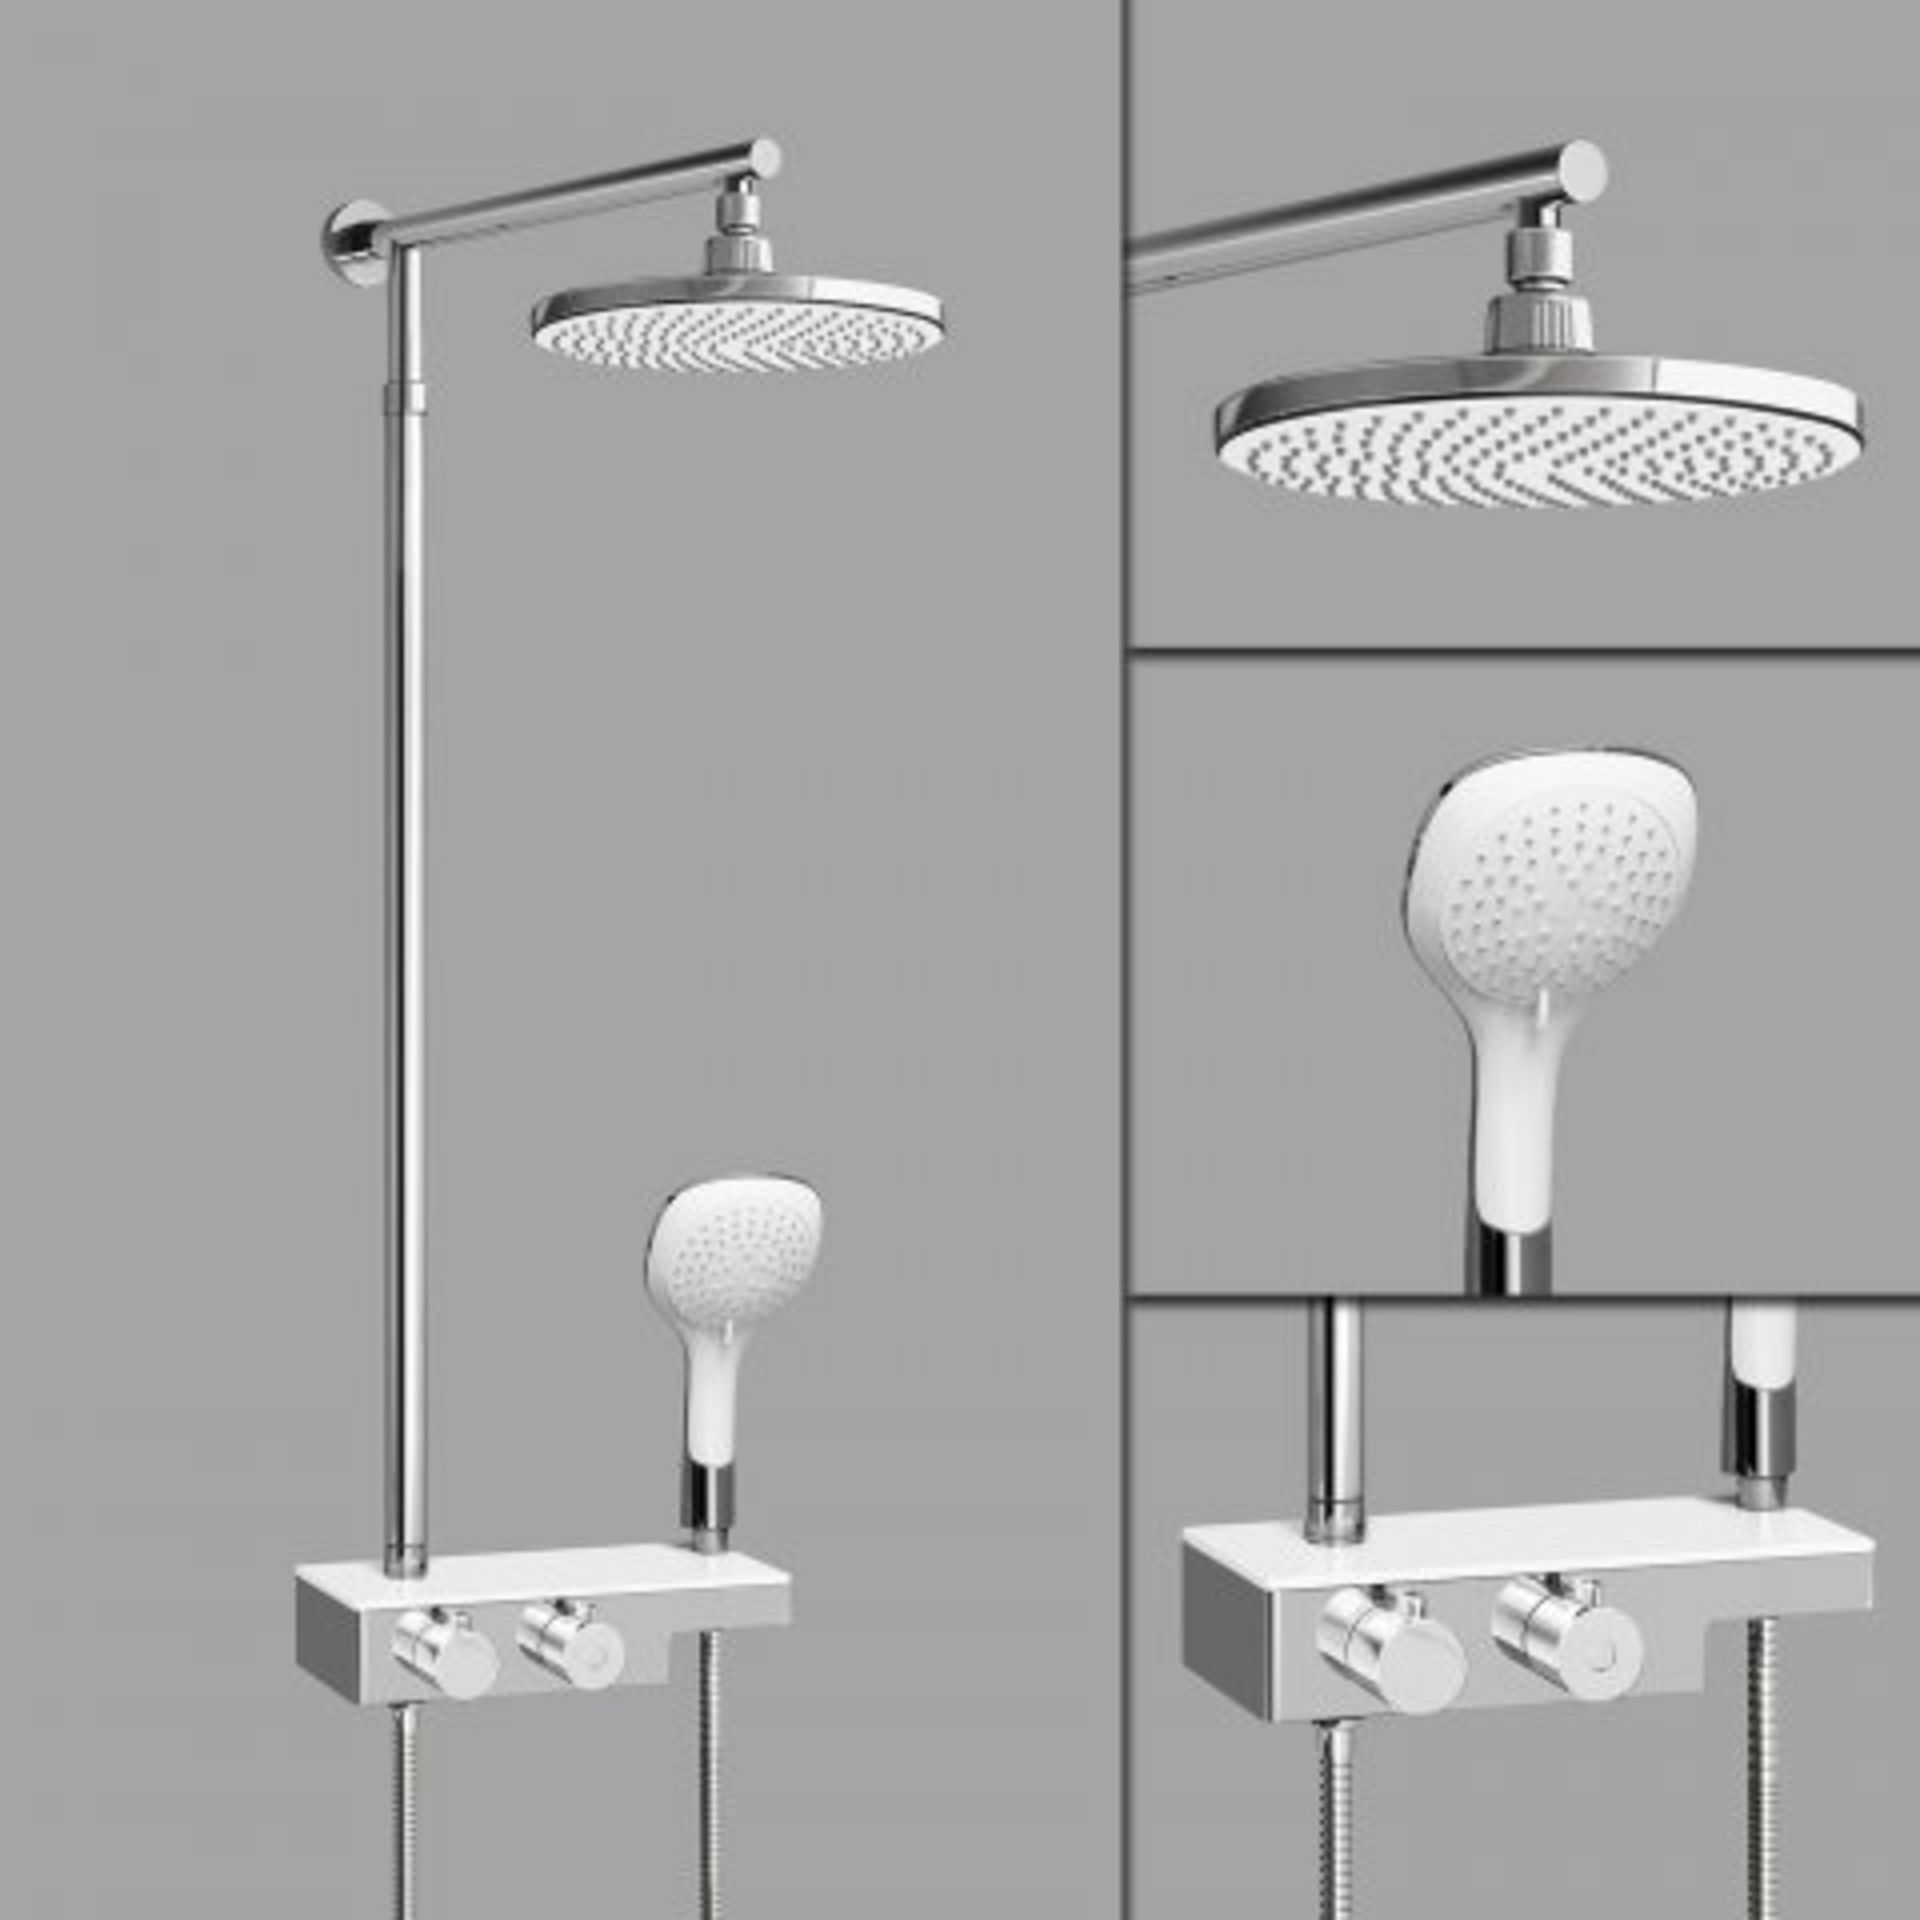 (I53) Round Exposed Thermostatic Mixer Shower Kit, Large Shower Head & Shelf RRP £349.99 Flaunting a - Bild 4 aus 4